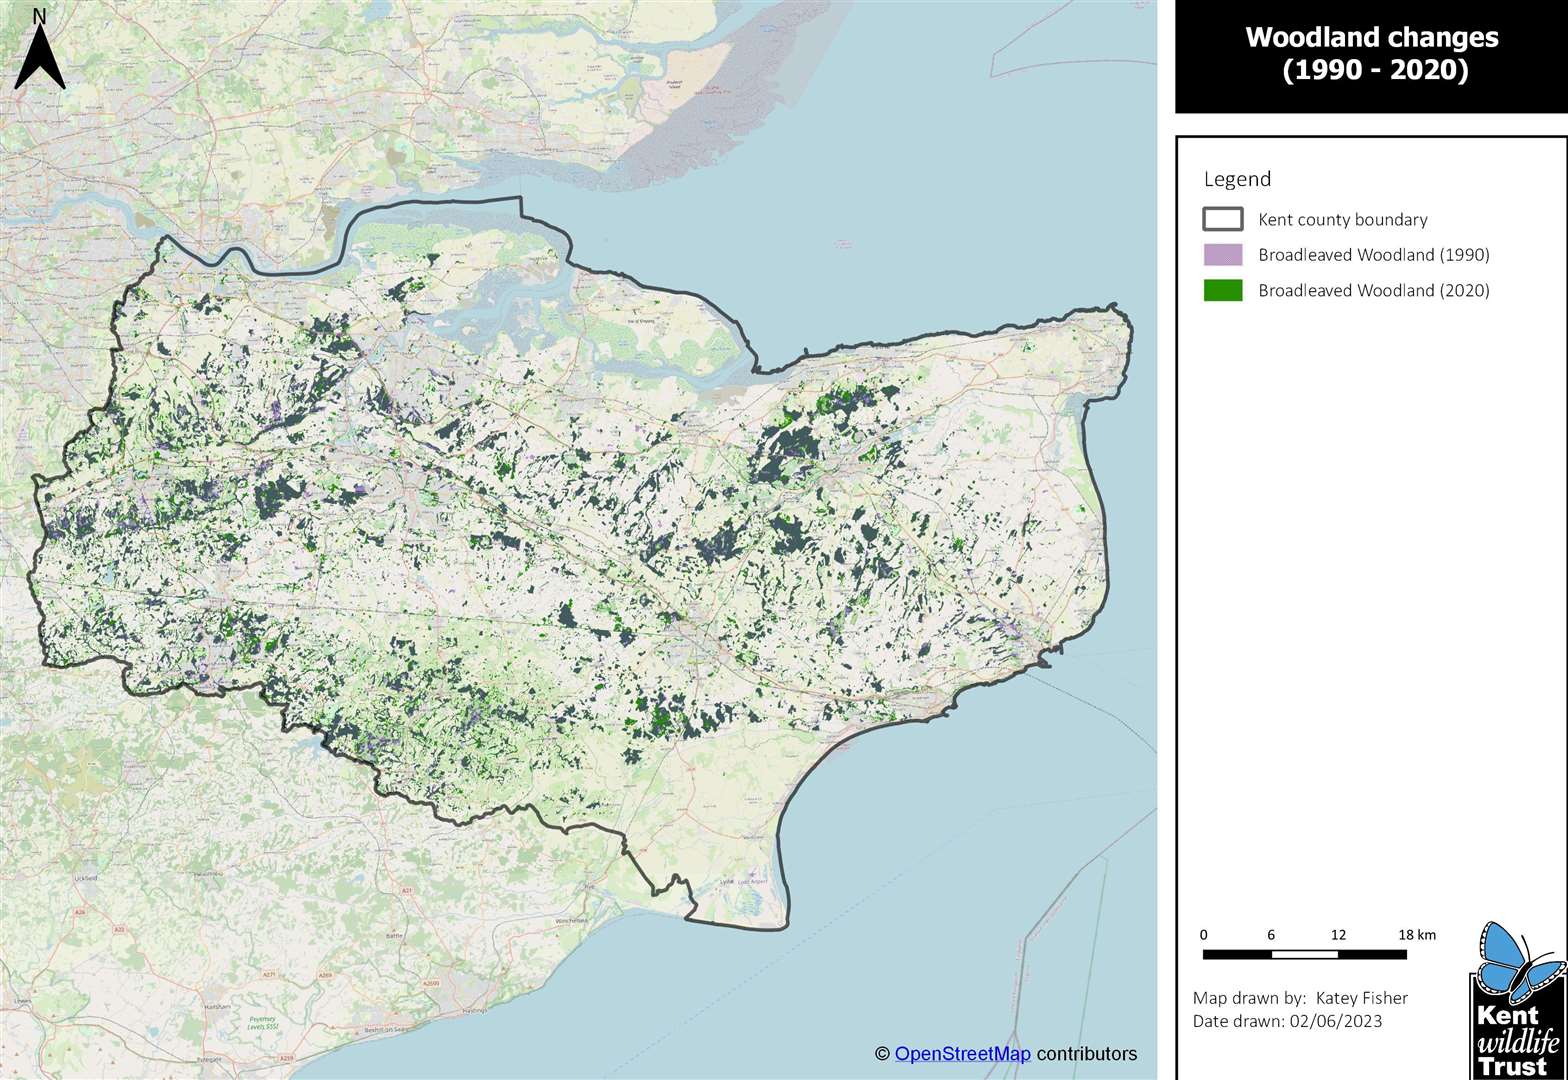 Changes in woodland coverage in Kent, 1990-2020. Supplied by Kent Wildlife Trust